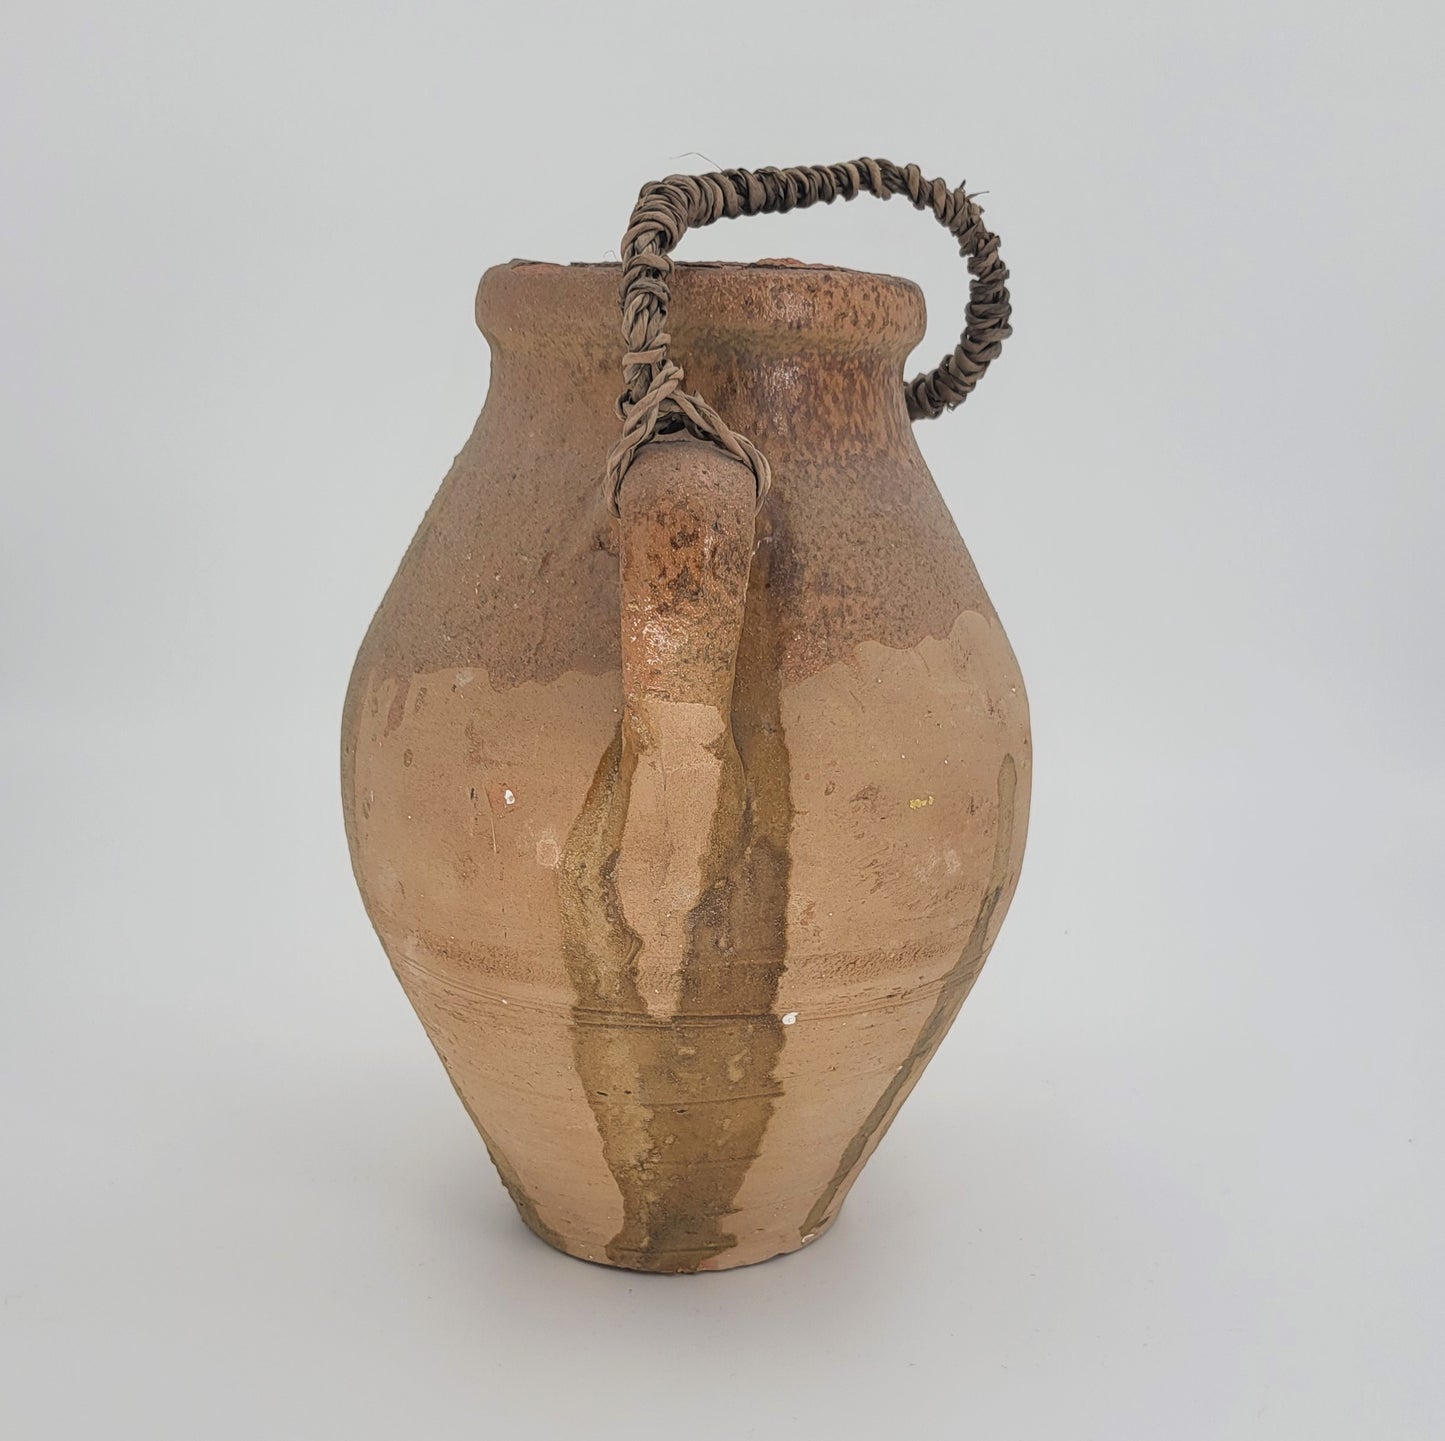 Moraccan Vase with Rope handle